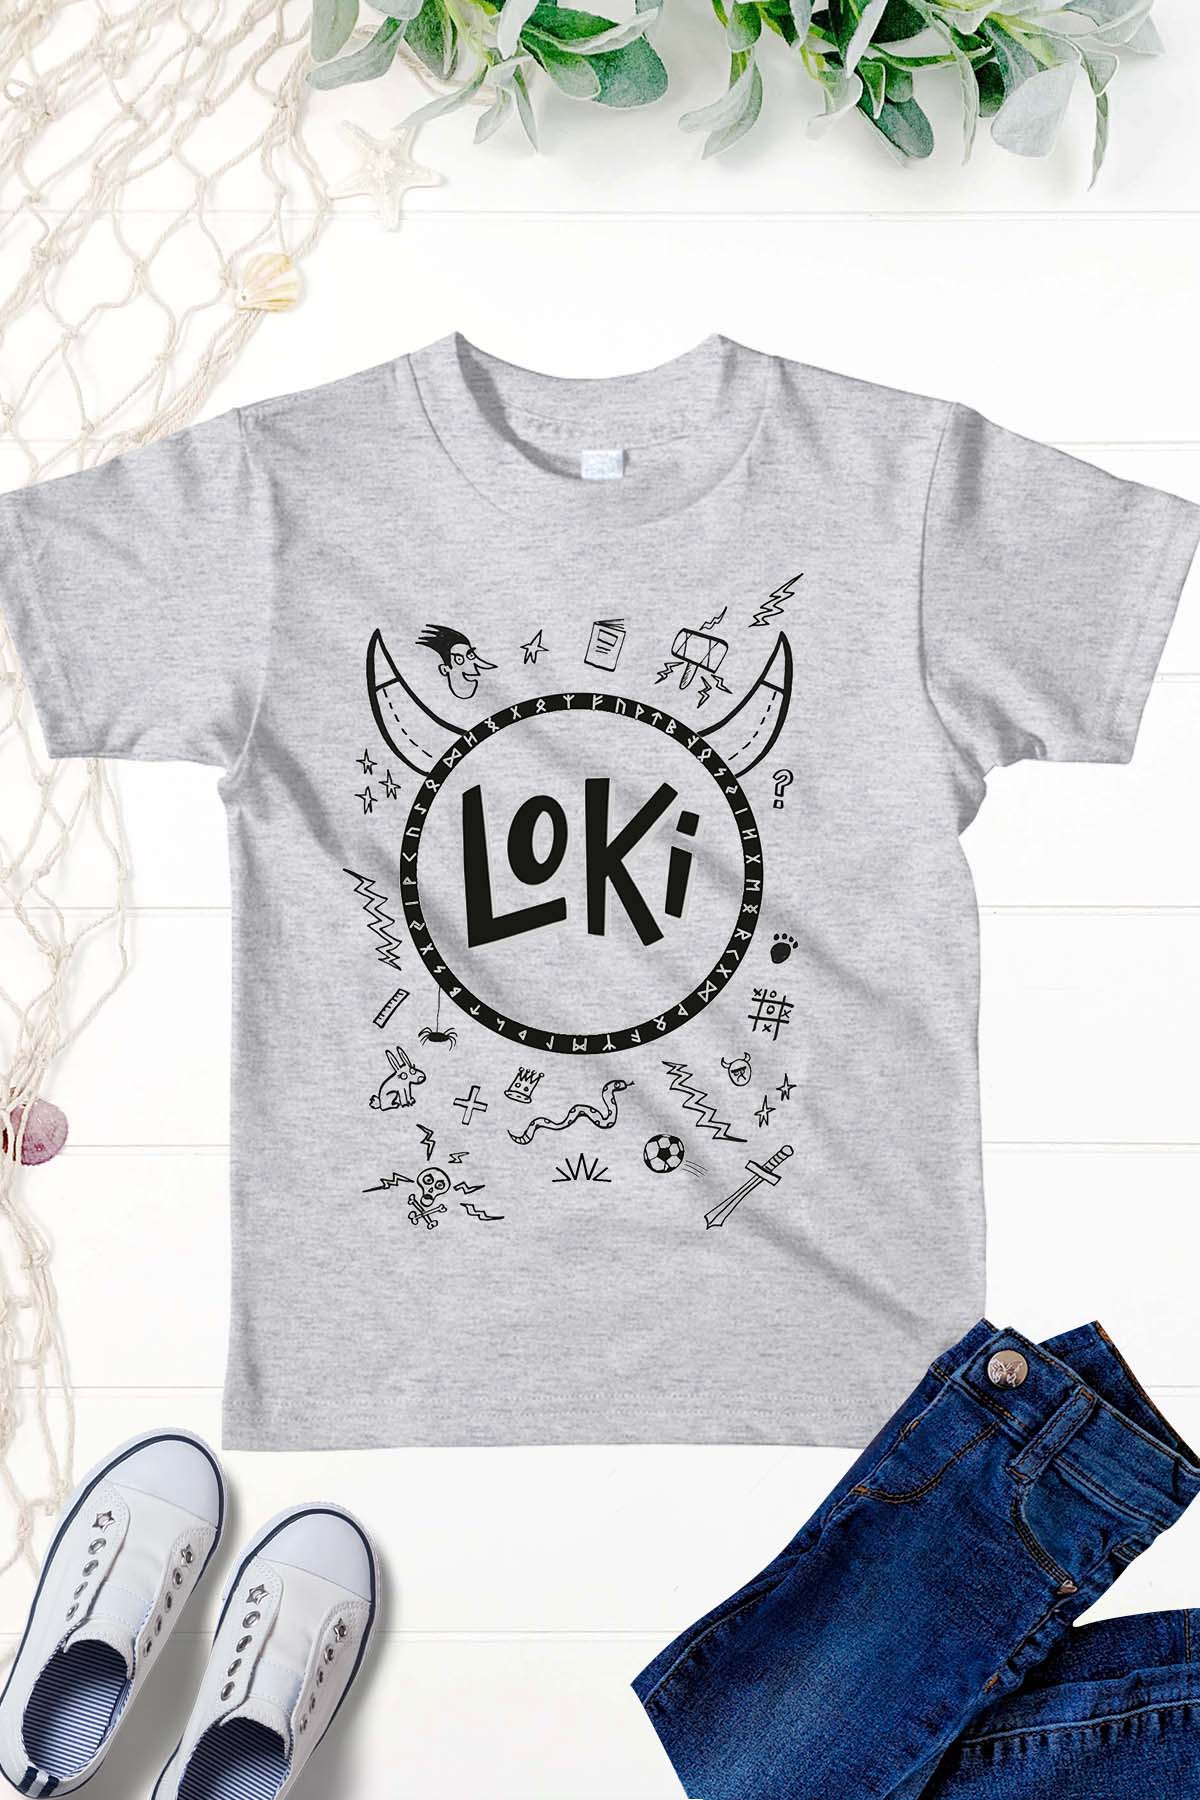 Loki Tales Of A Bad God World Book Day Kids T-Shirt Toddler School Party Gift Tees